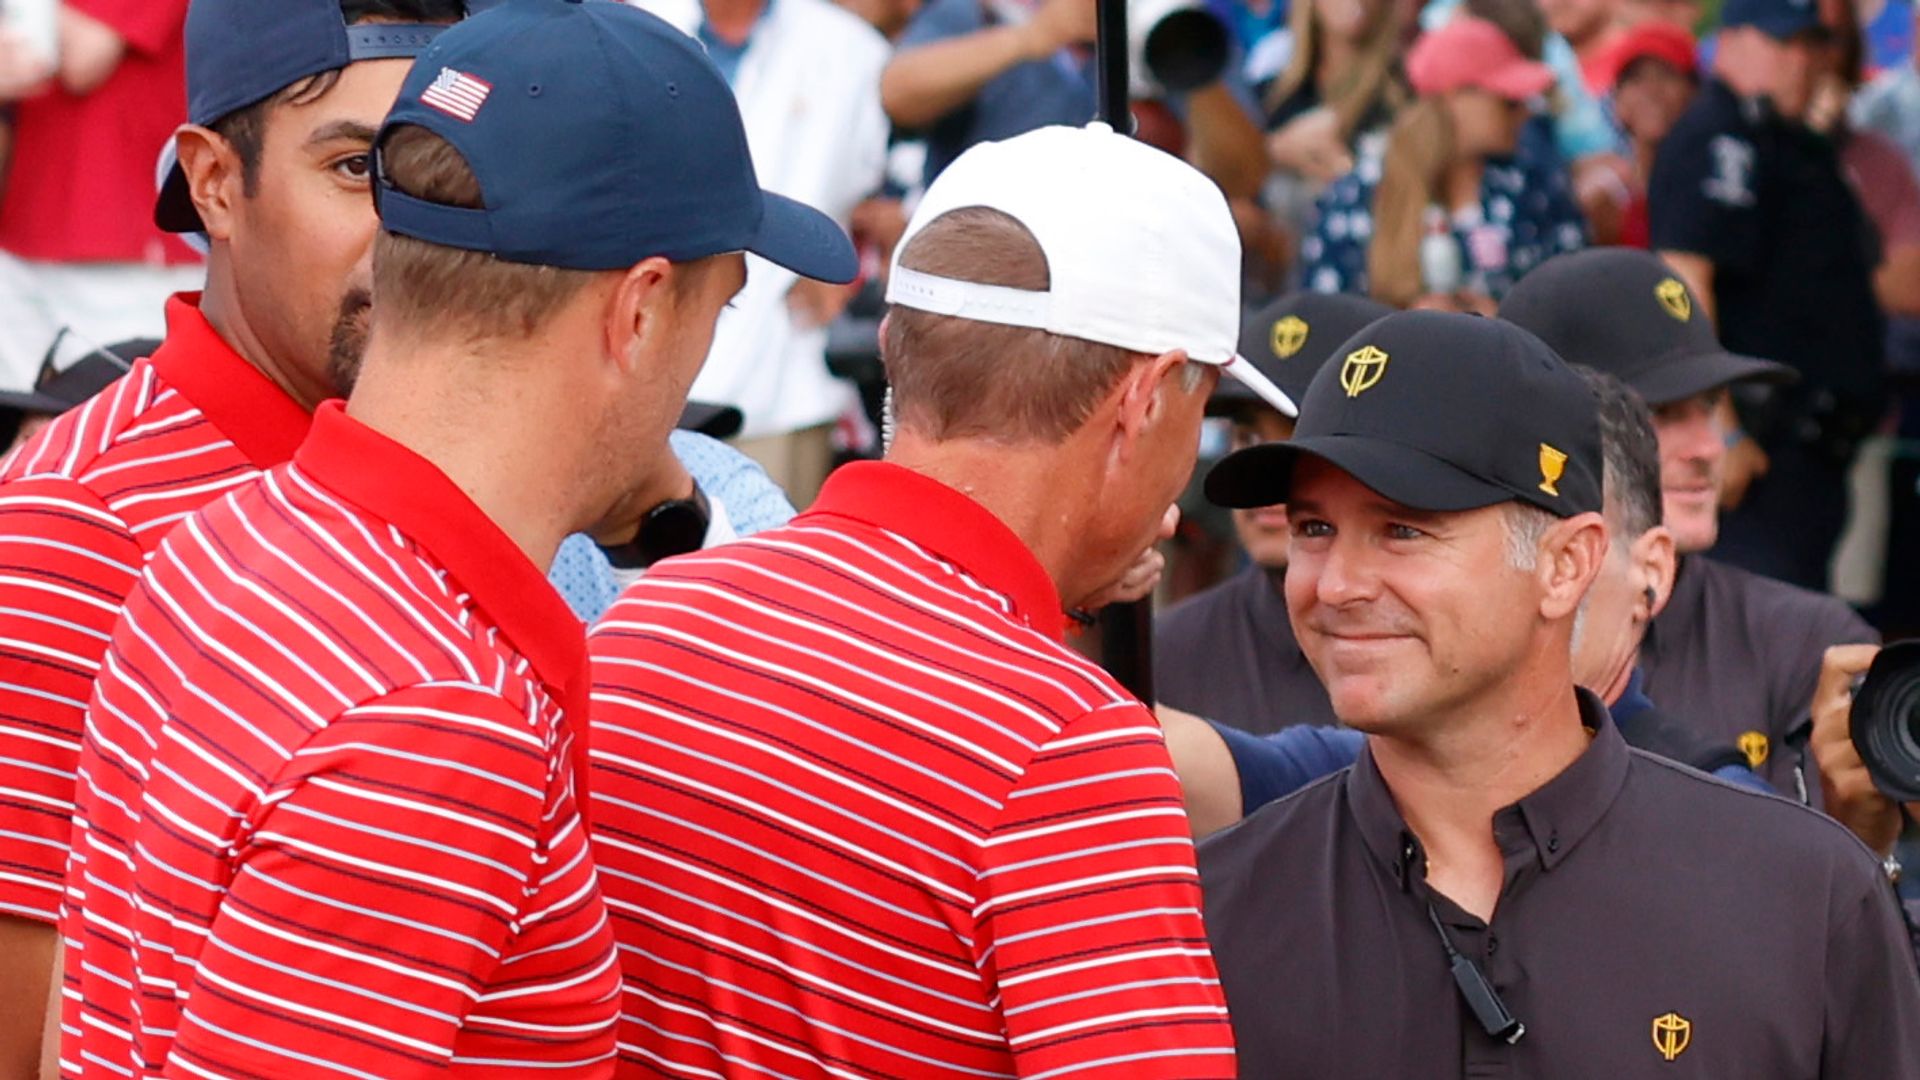 New era for the International Team? Key storylines from the Presidents Cup